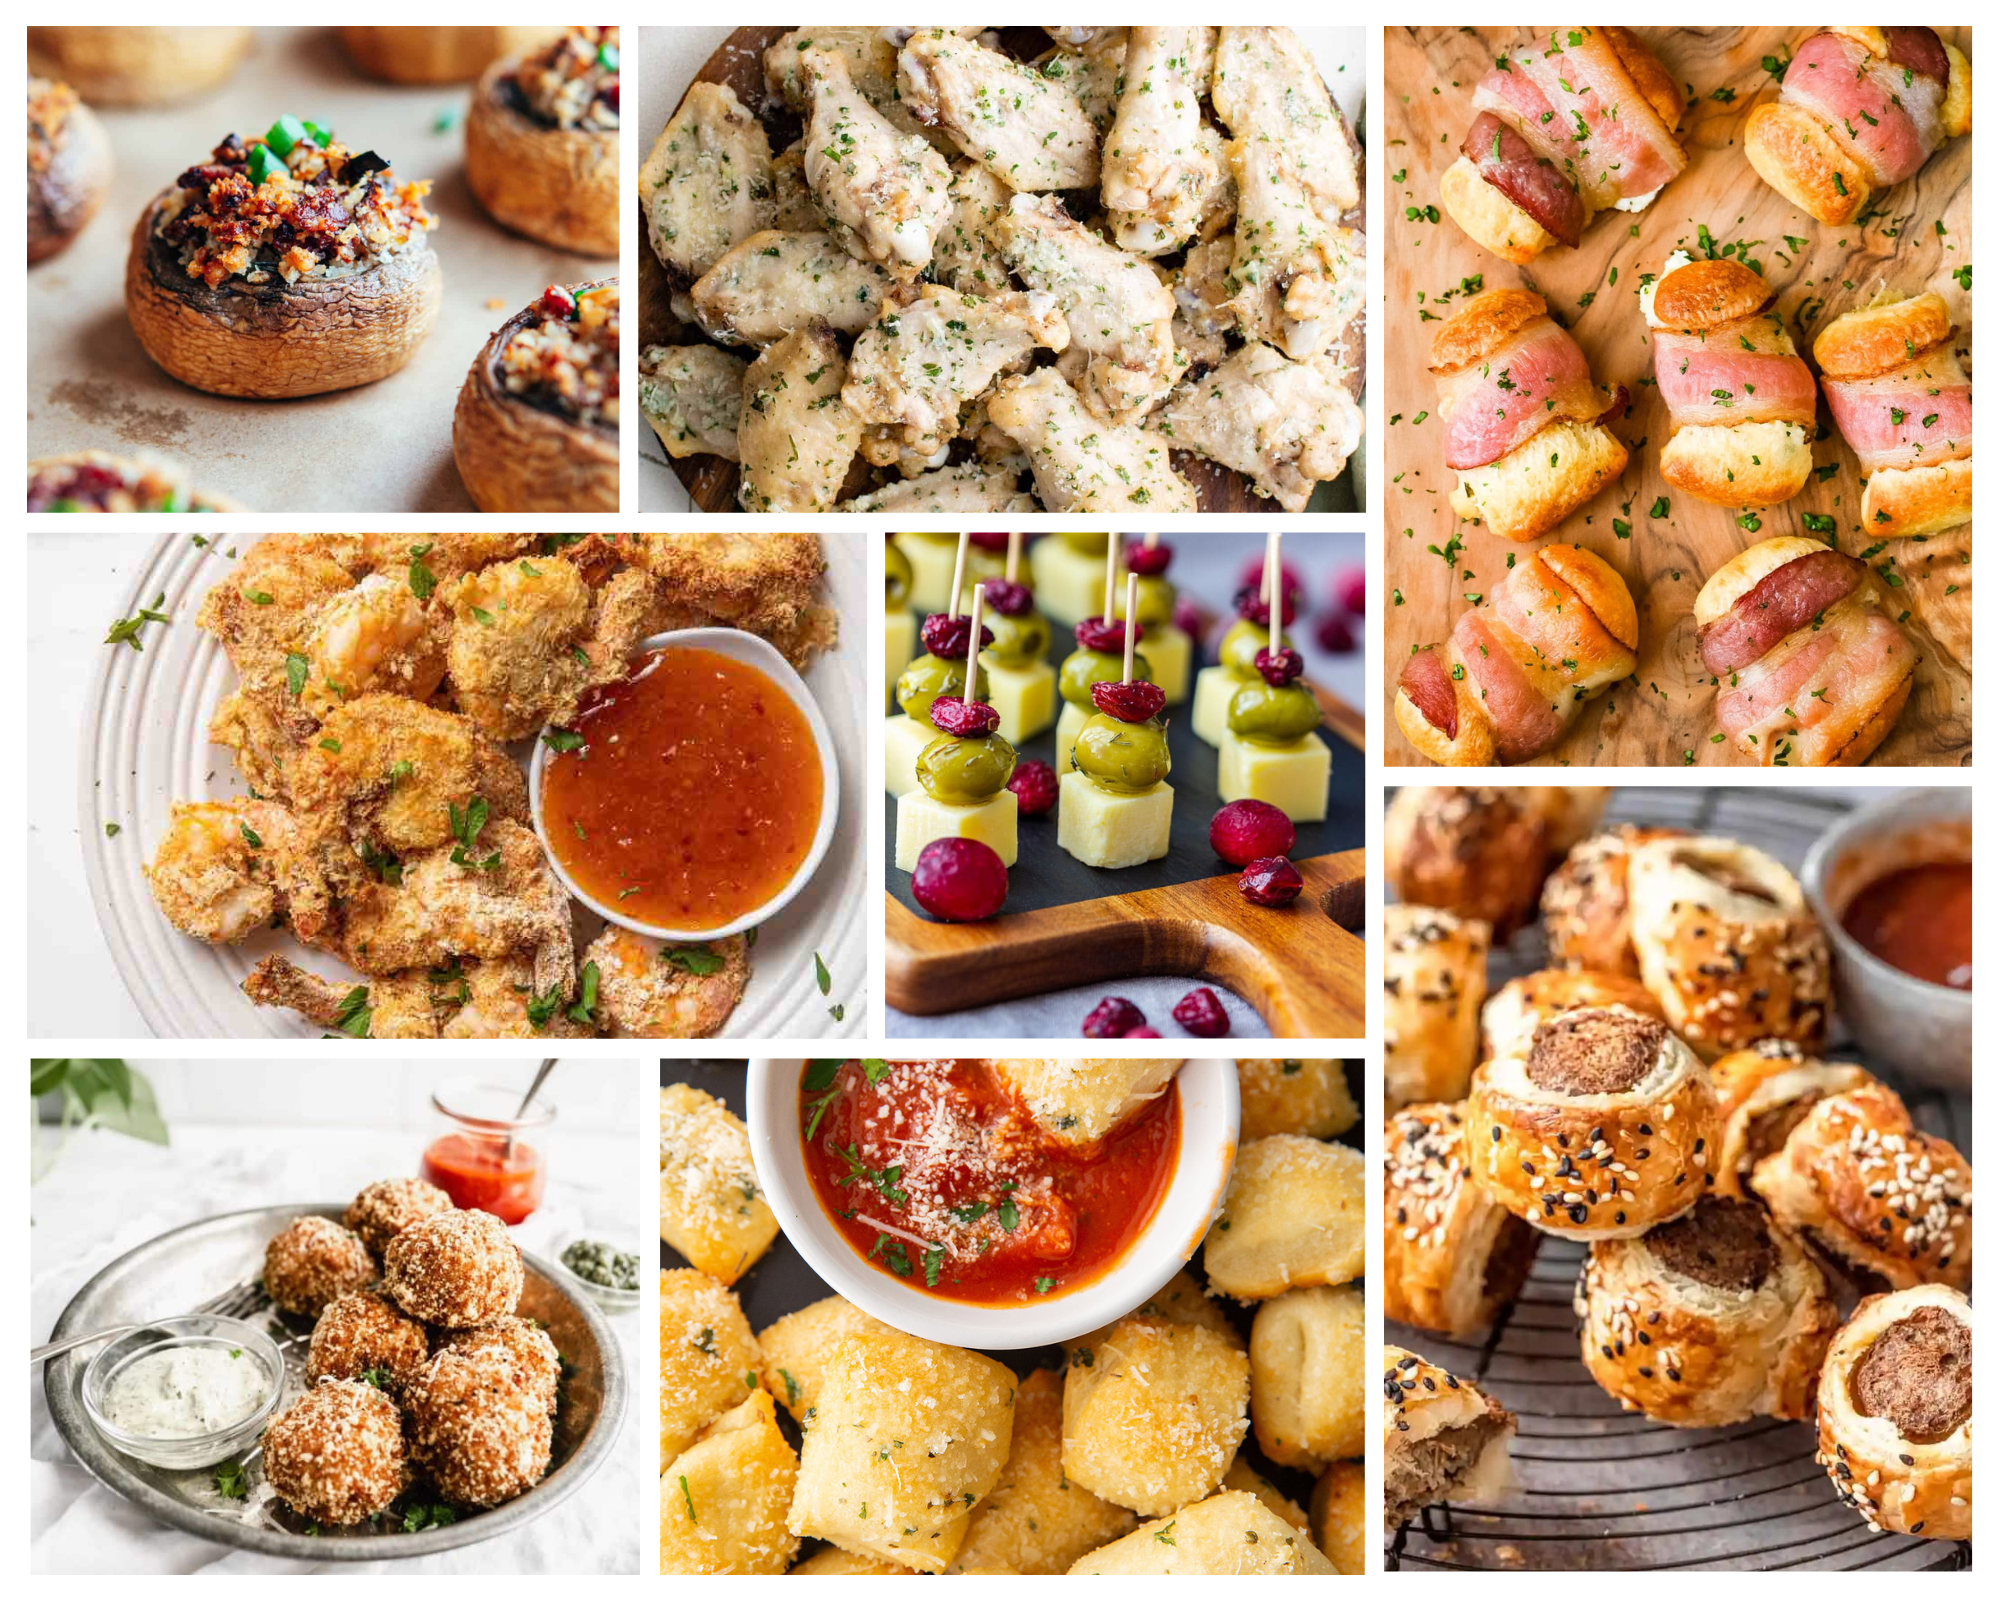 roundup image of bite sized snack appetizers including stuffed mushrooms, chicken wings and fried shrimp